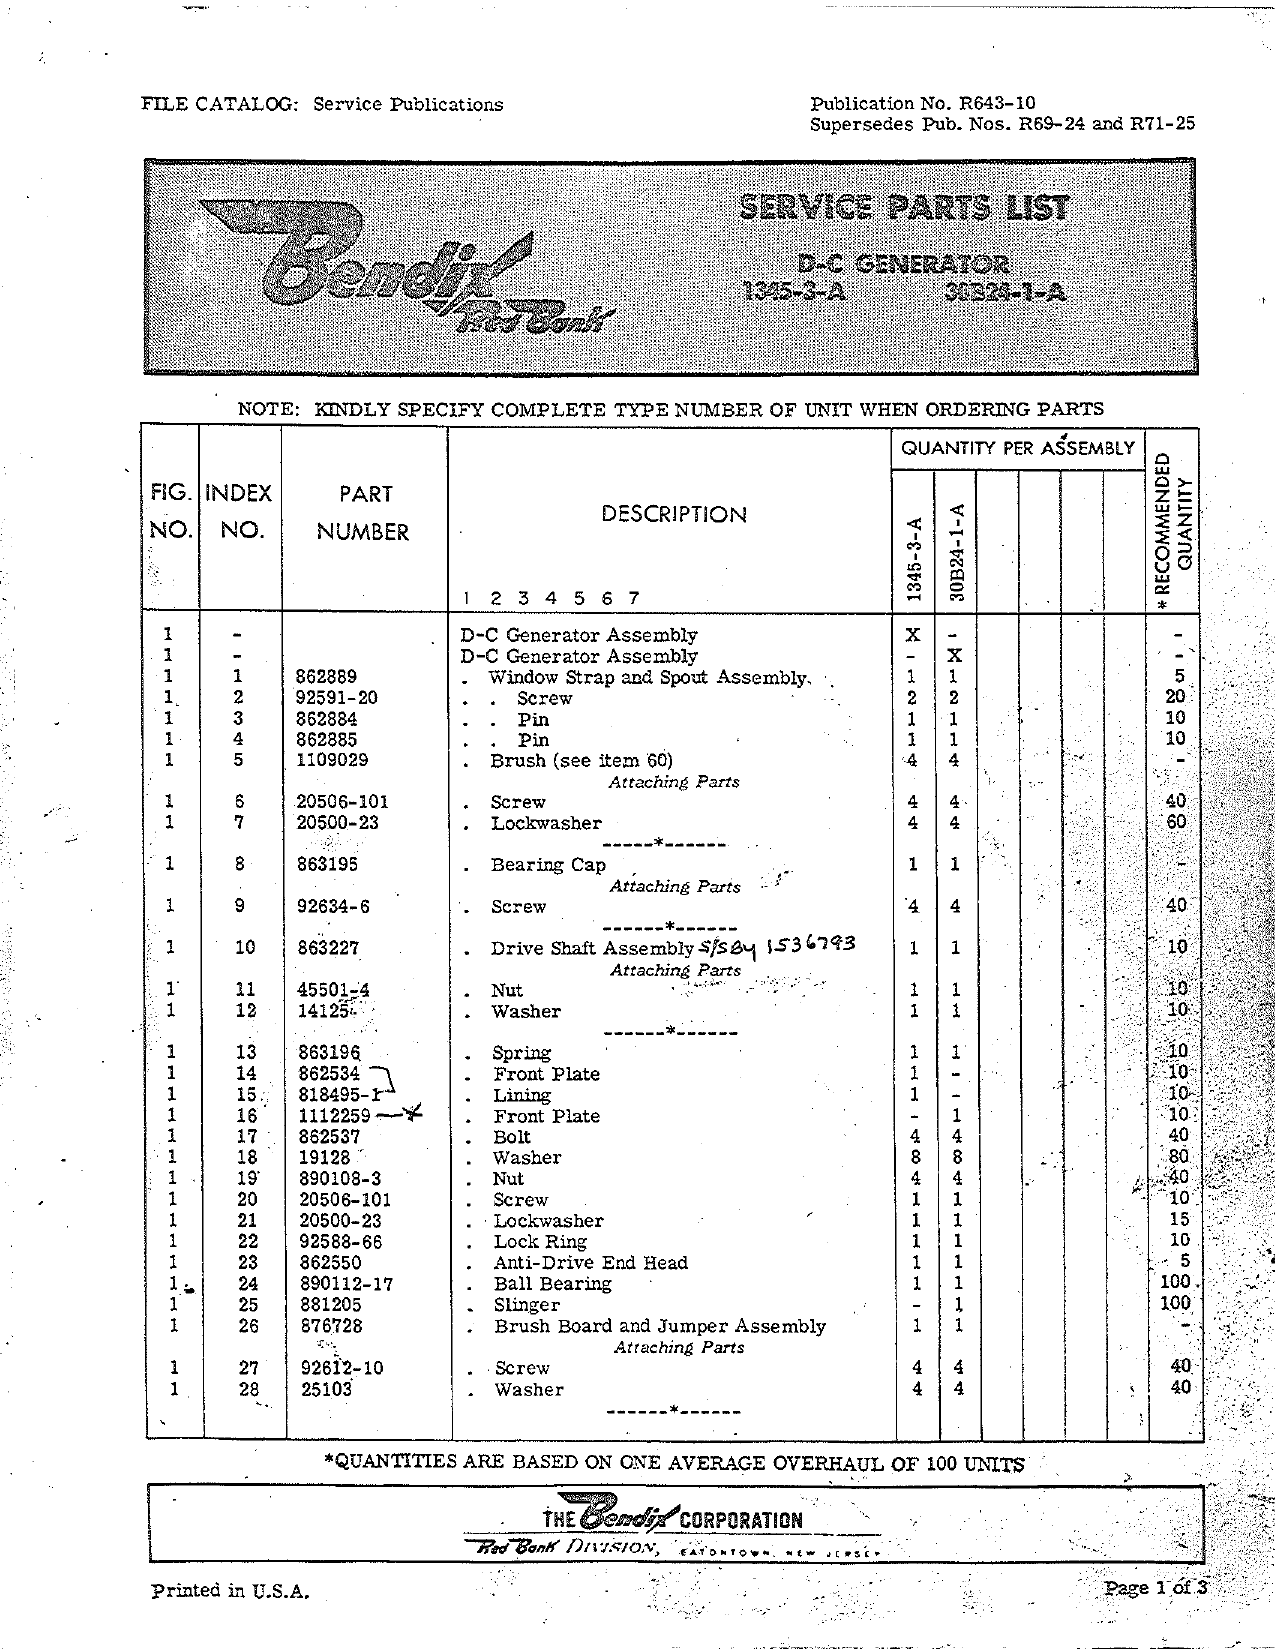 Sample page 1 from AirCorps Library document: Service Parts List for DC Generator - 1345-3-A, 30B24-1-A